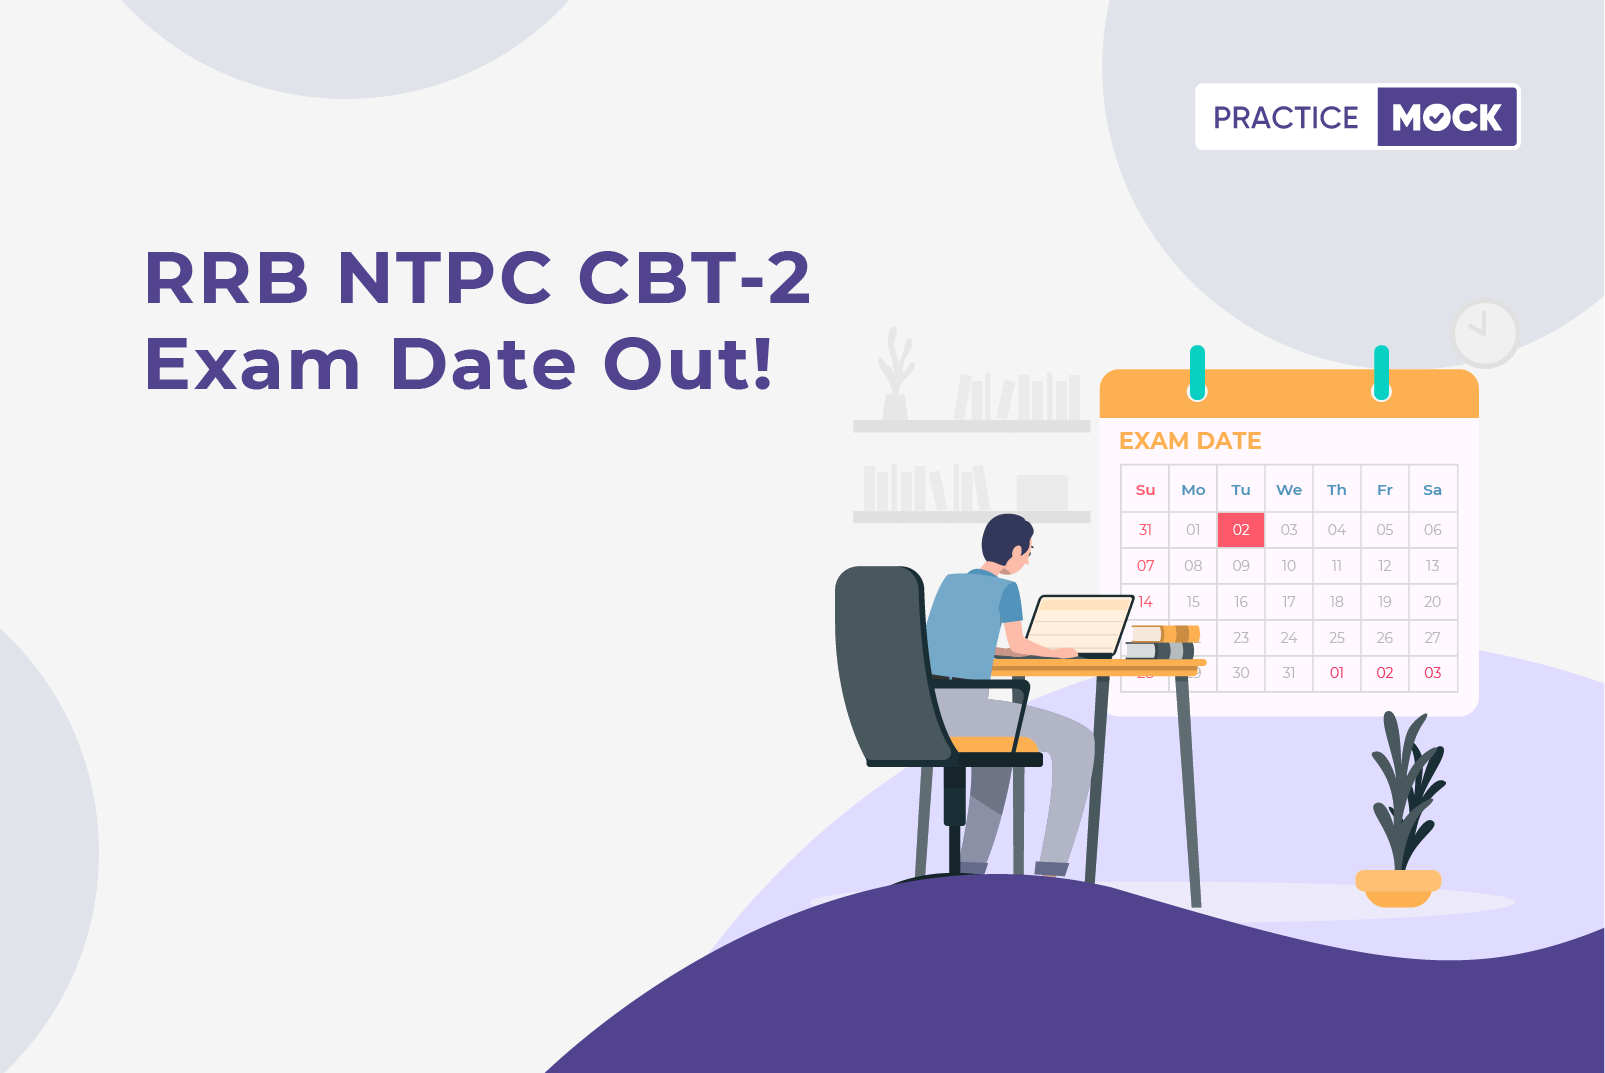 RRB NTPC CBT-2 date 2022 Out! -Check out the New Exam Schedule